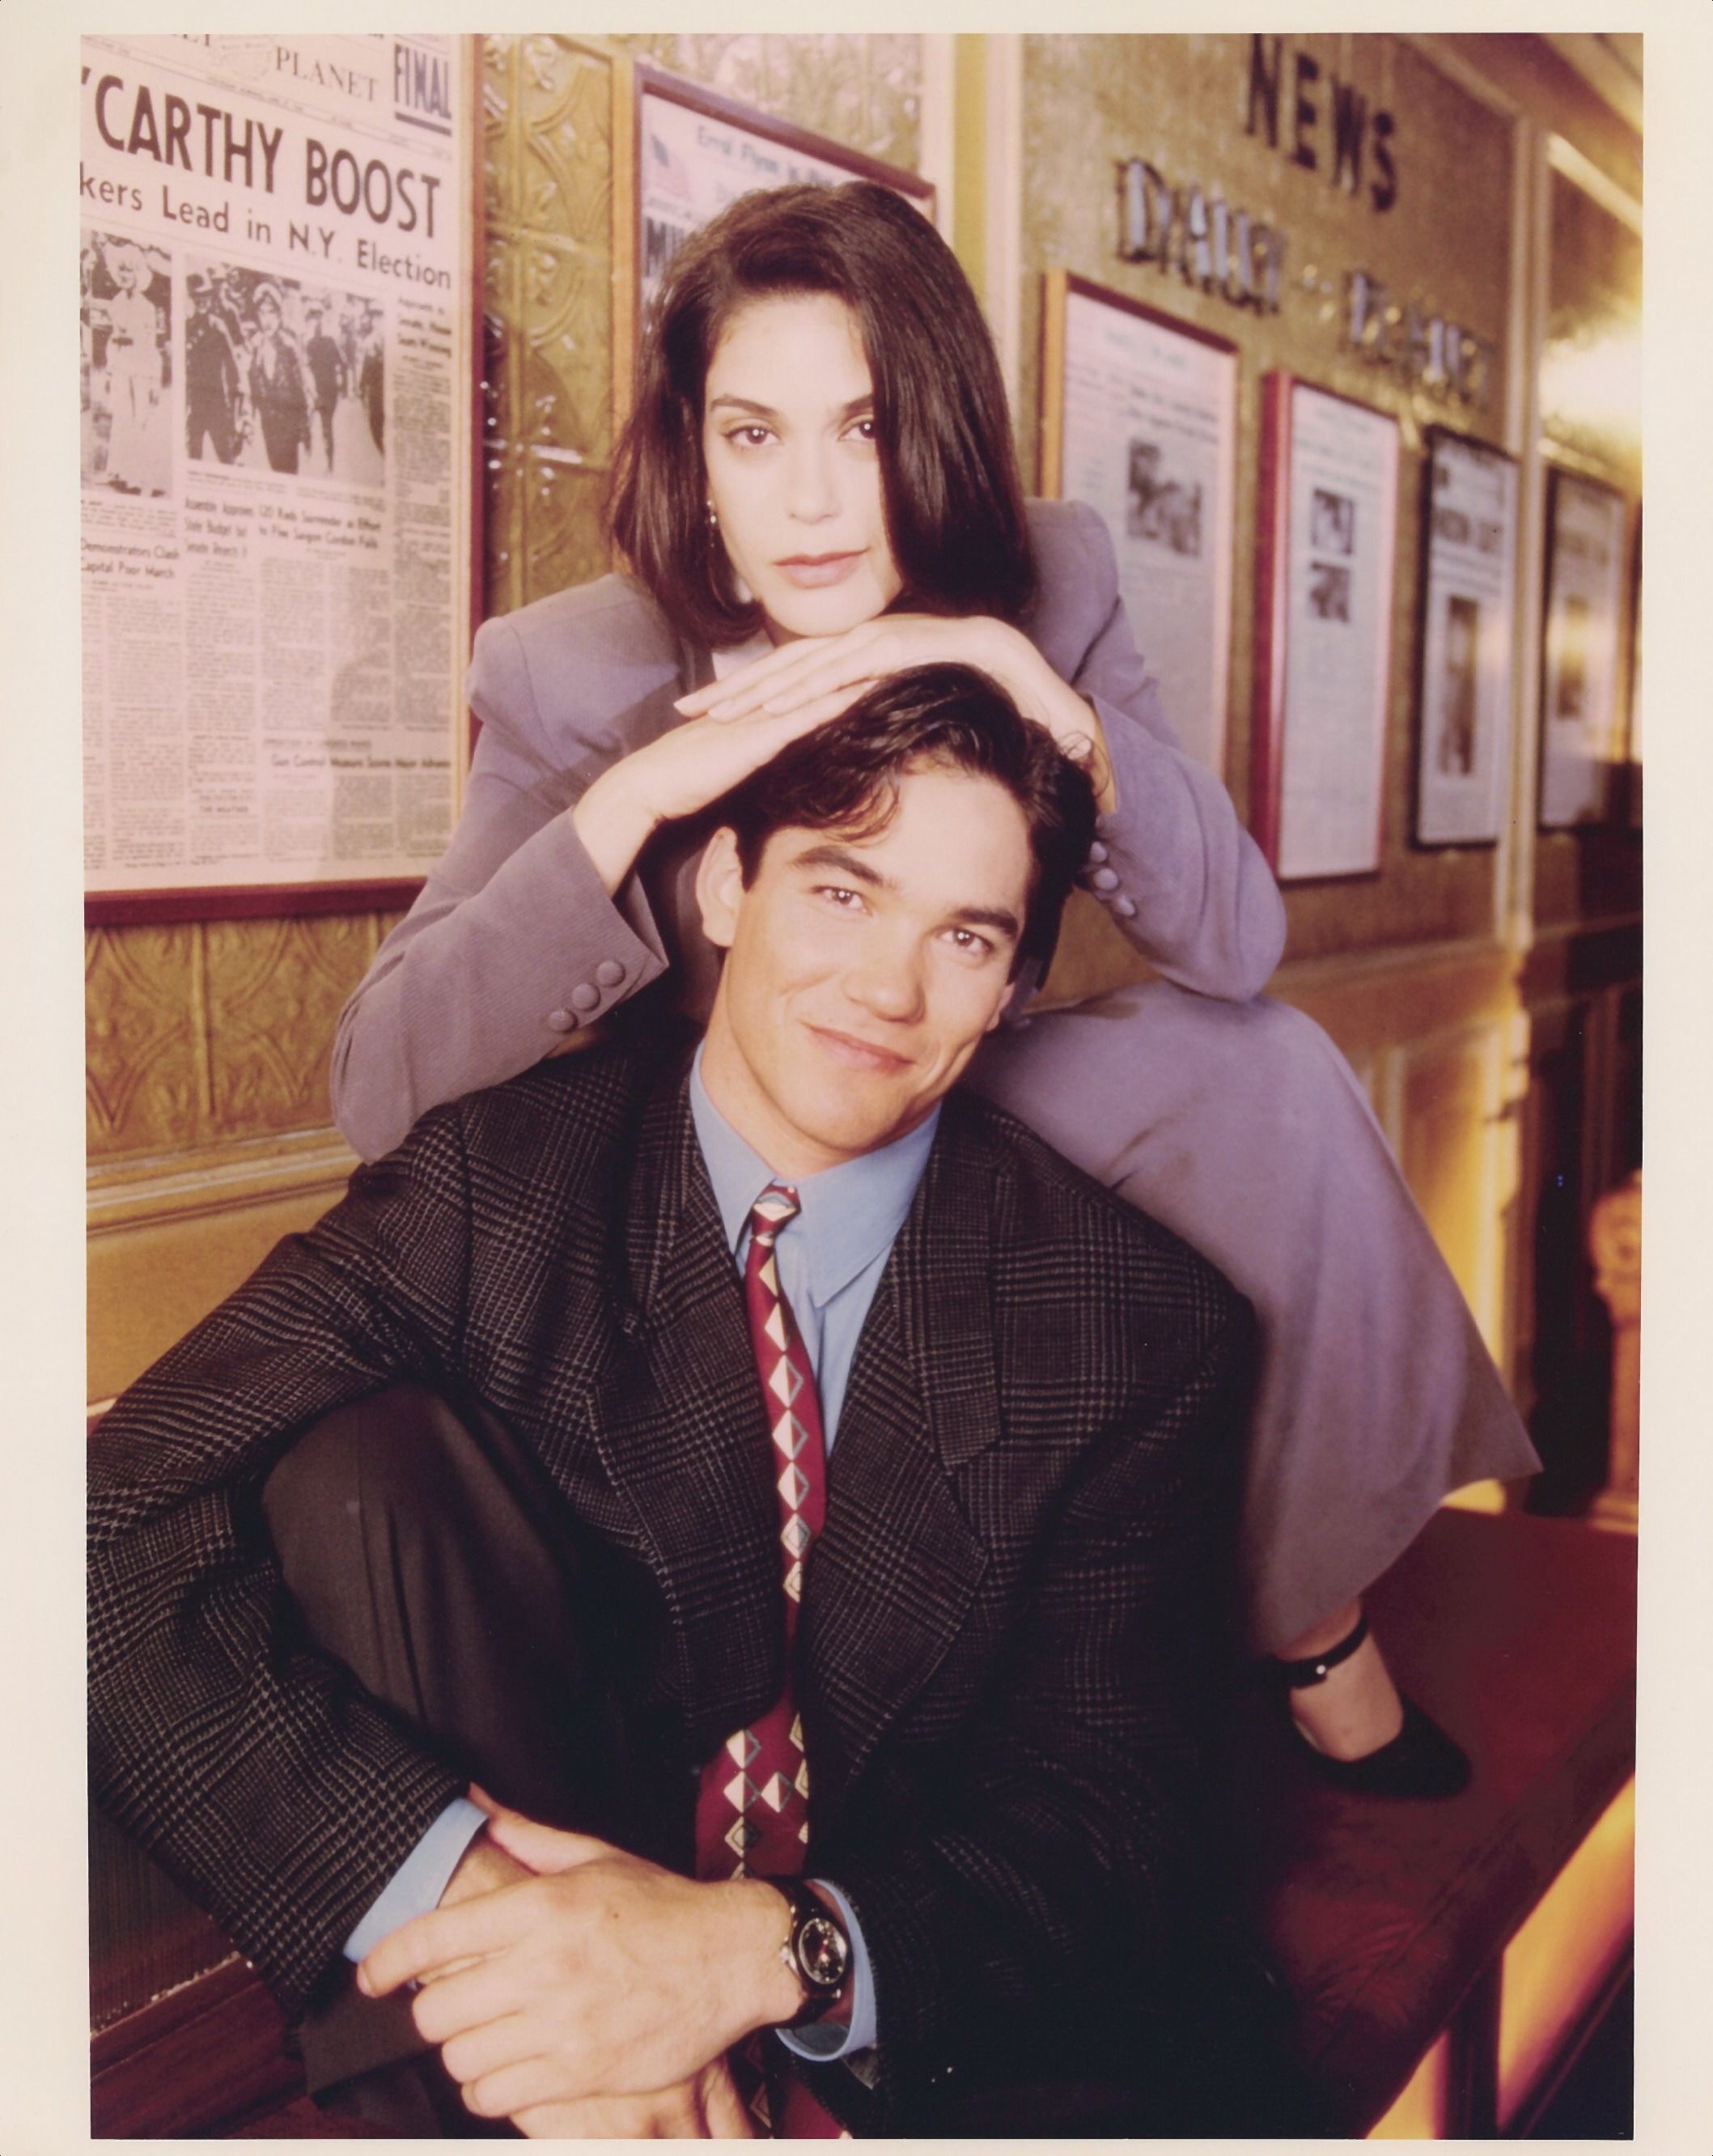 Lois and Clark: The New Adventures of Superman: 90's TV show starring Dean Cain and Teri Hatcher, Developed for television by Deborah Joy LeVine. 2120x2670 HD Background.